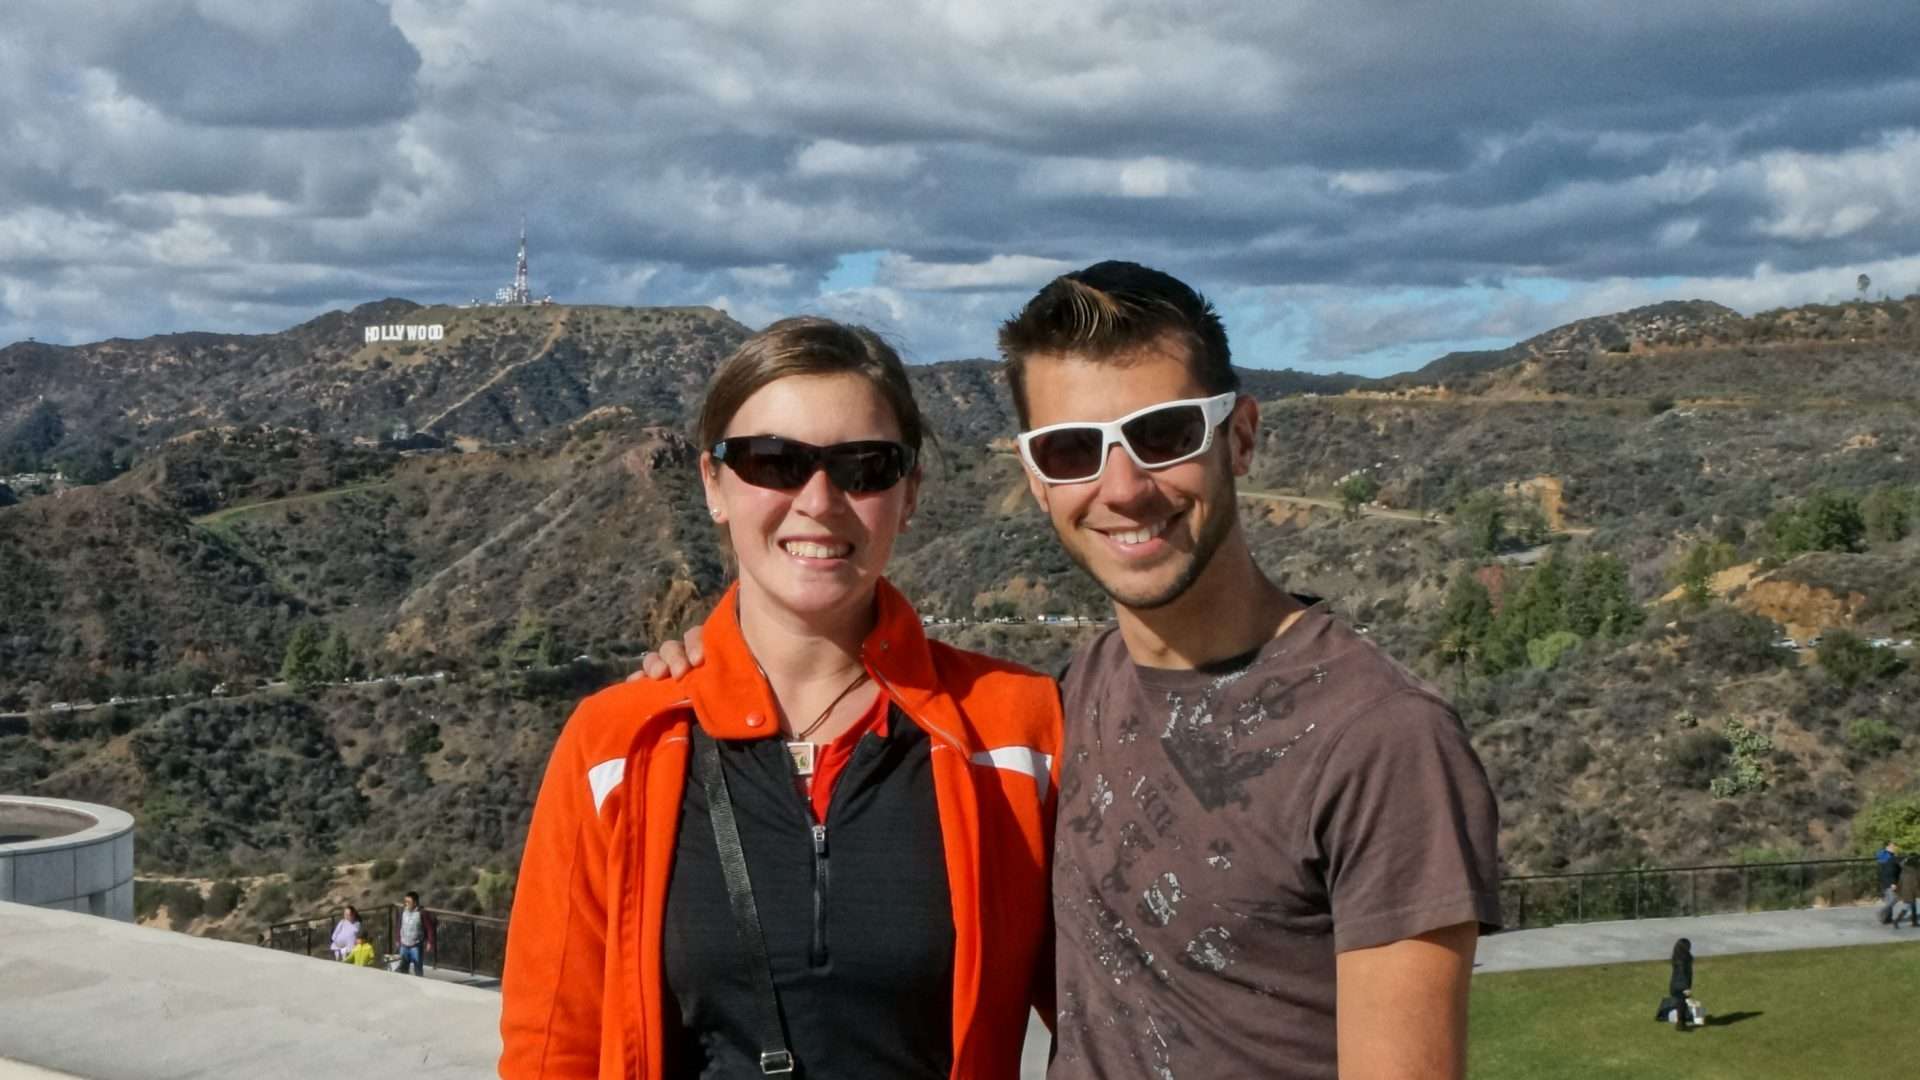 Tom and Cait at Griffith Observatory with hollywood sign in background